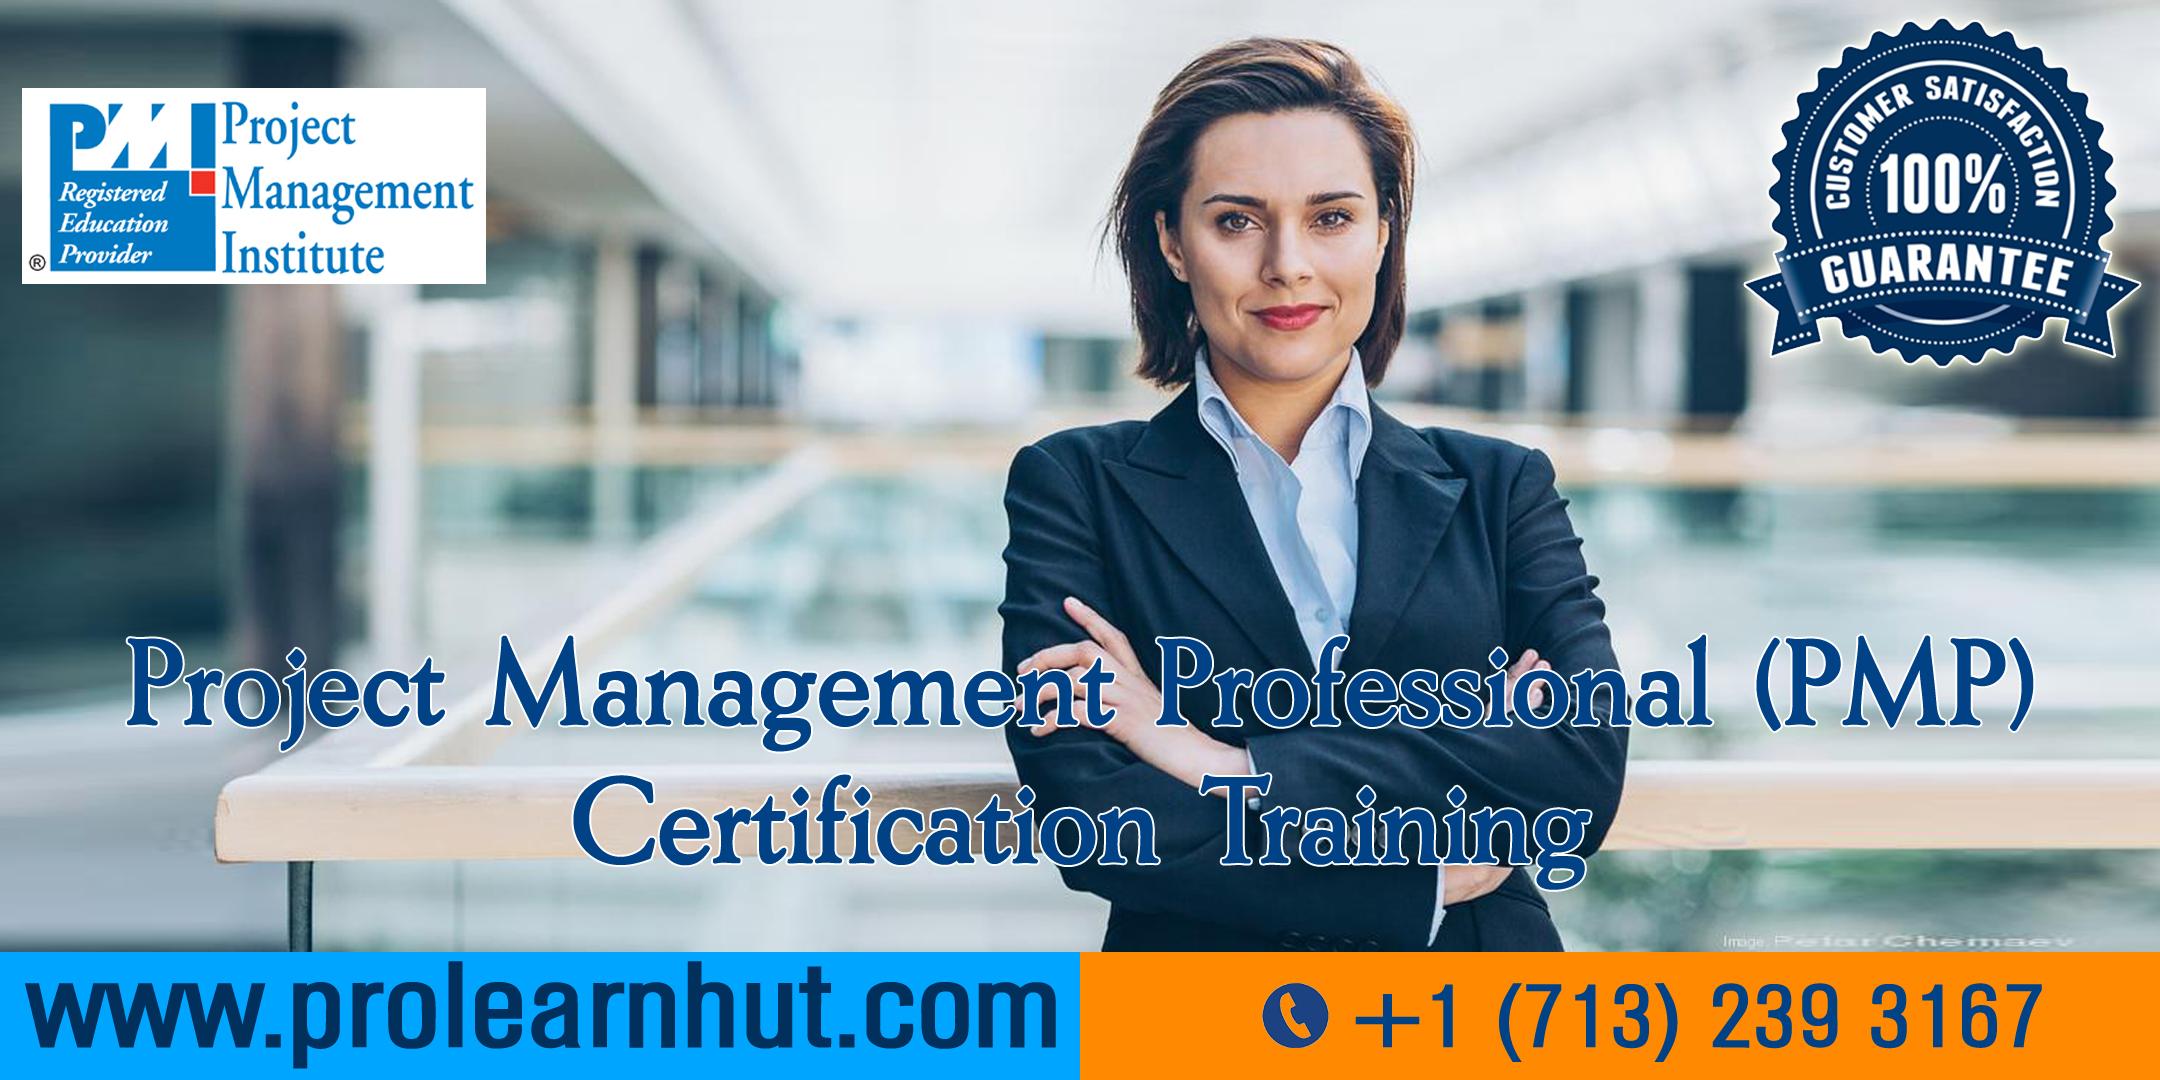 PMP Certification | Project Management Certification| PMP Training in Knoxville, TN | ProLearnHut